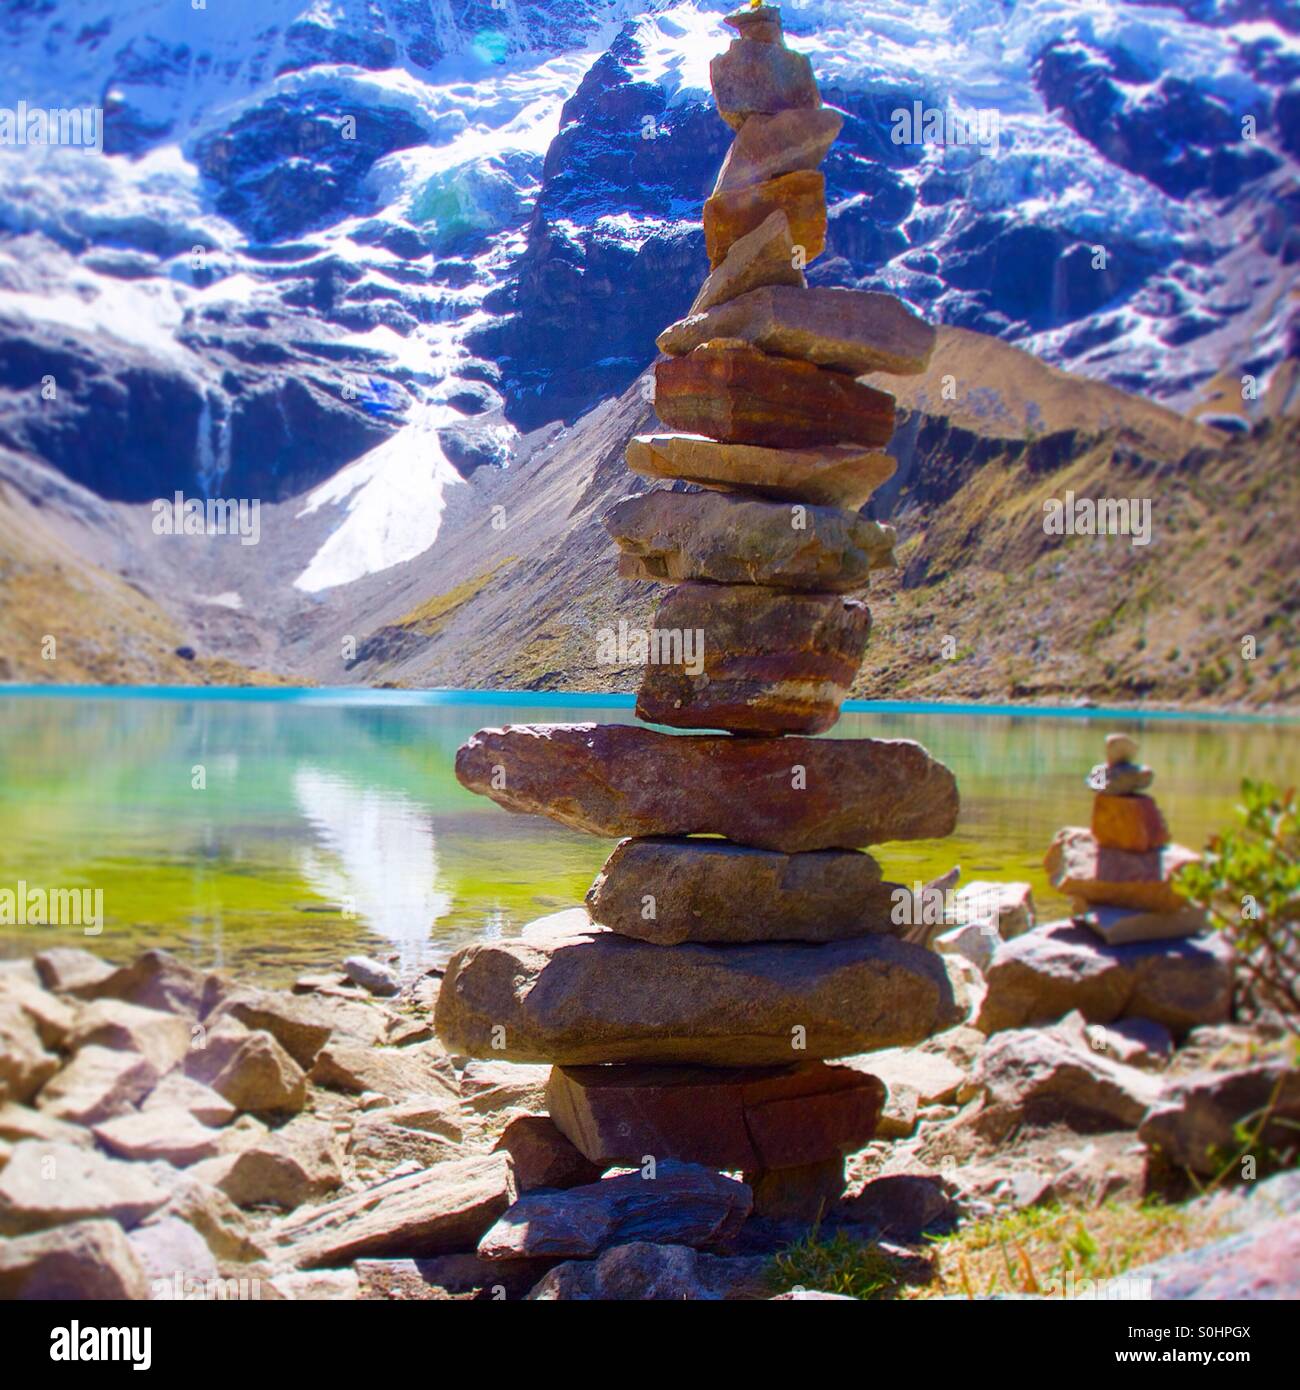 A carefully stacked rock tower is placed with this high elevation, glacier fed lake, reflection blue skies and green algae. Stock Photo